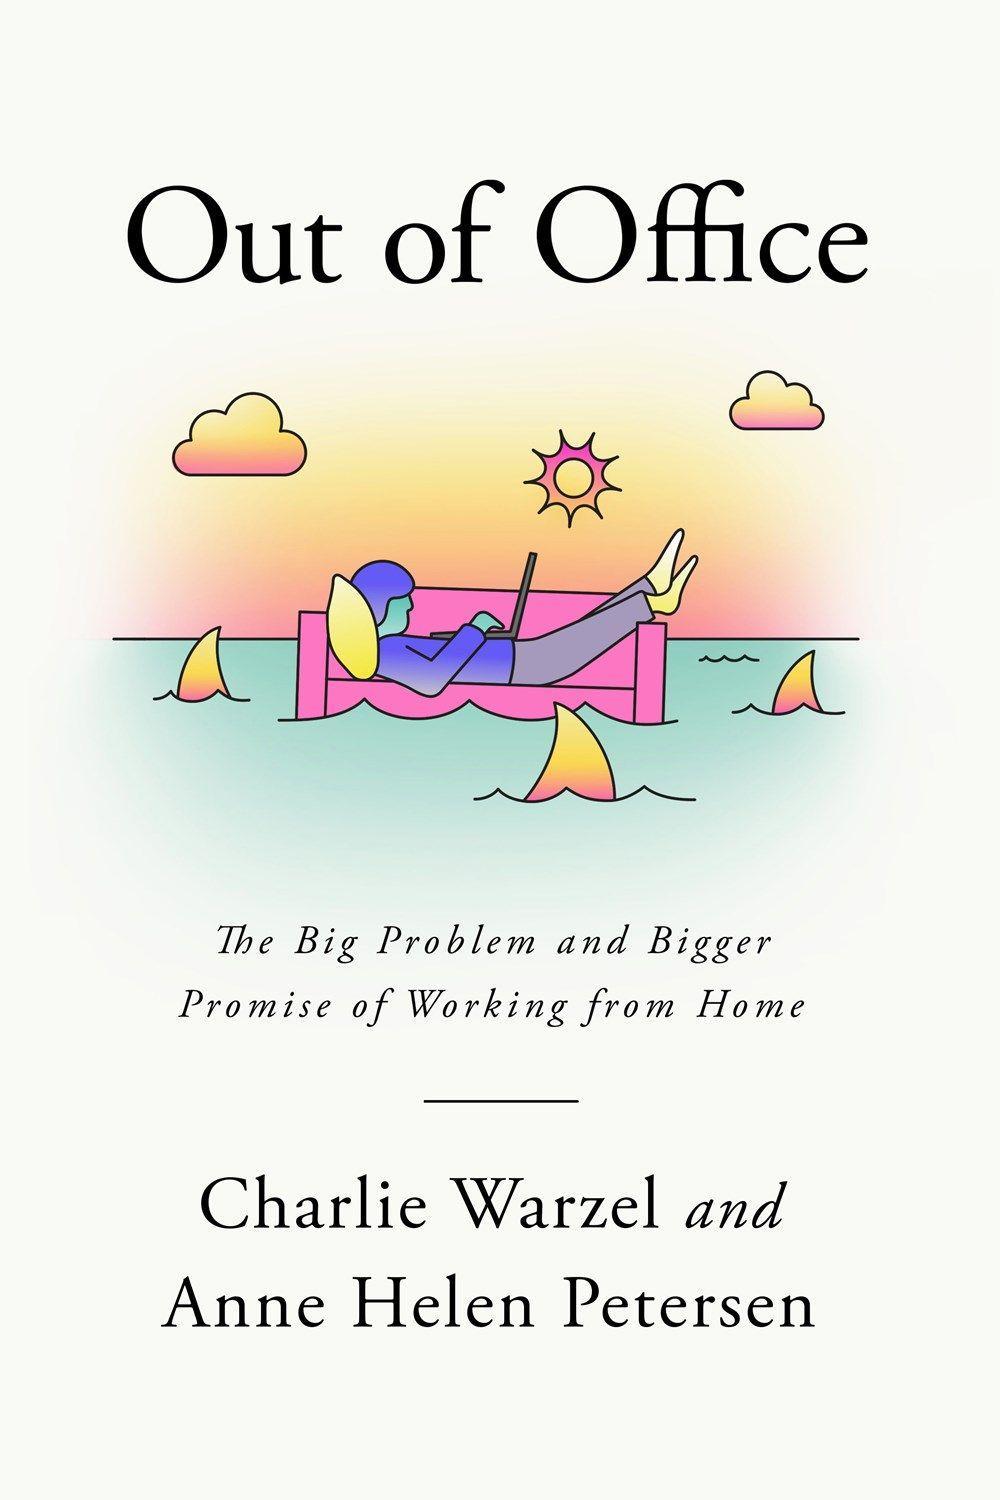 Out of Office | The Big Problem and Bigger Promise of Working from Home | Charlie Warzel (u. a.) | Taschenbuch | 272 S. | Englisch | Knopf Doubleday Publishing Group | EAN 9781524712105 - Warzel, Charlie